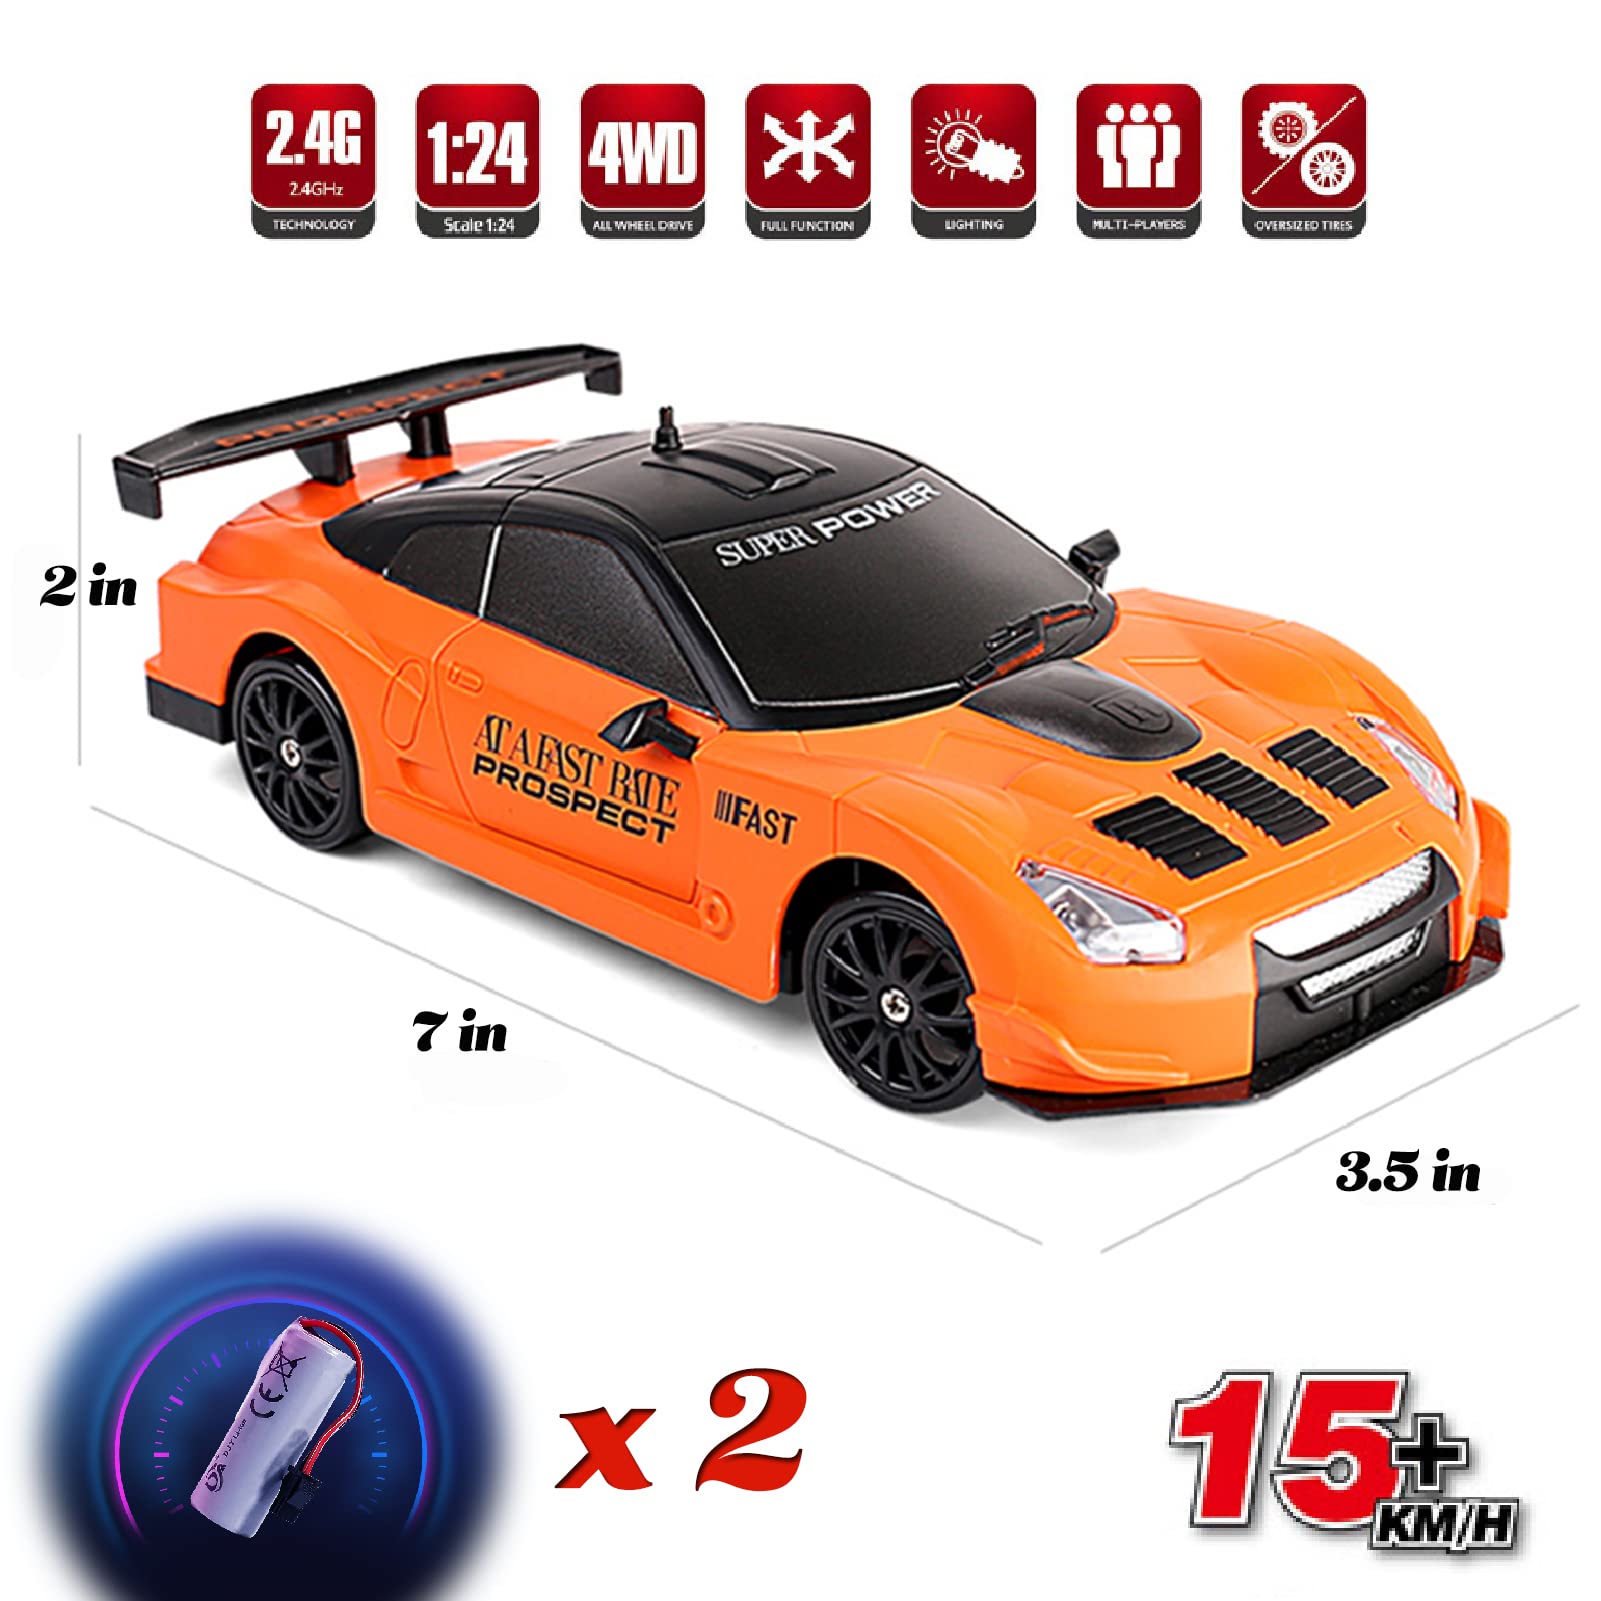 YUAN PLAN RC Drift Car, 1:24 Remote Control High Speed Race Drifting Cars, 2.4GHz 4WD Electric Sport Racing Hobby Toy Car with Two Batteries Headlight for Boys and Girls Teens and Adults Gift (Red)